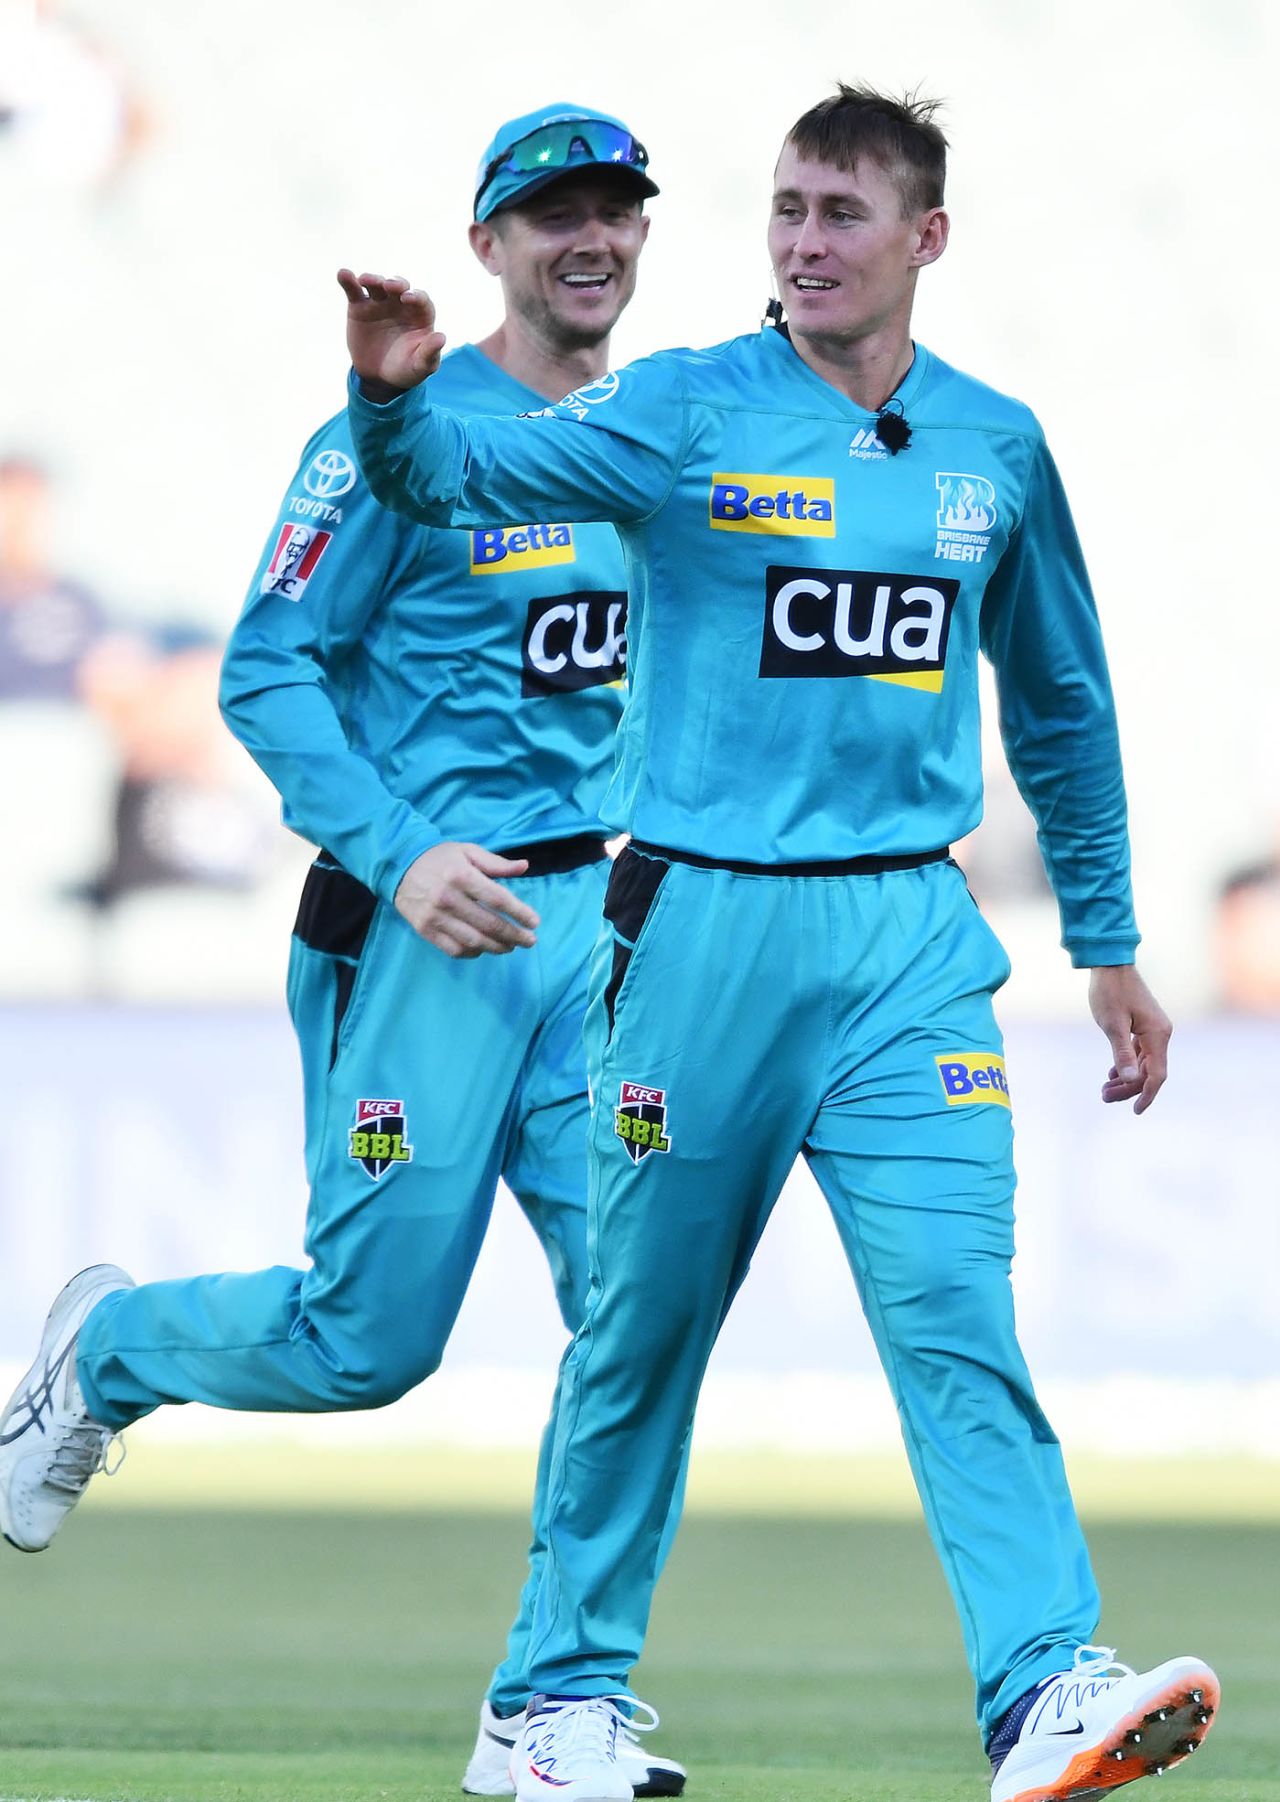 Marnus Labuschagne took two wickets on his return to the BBL, Adelaide Strikers vs Brisbane Heat, Adelaide Oval, Big Bash League, January 21, 2021